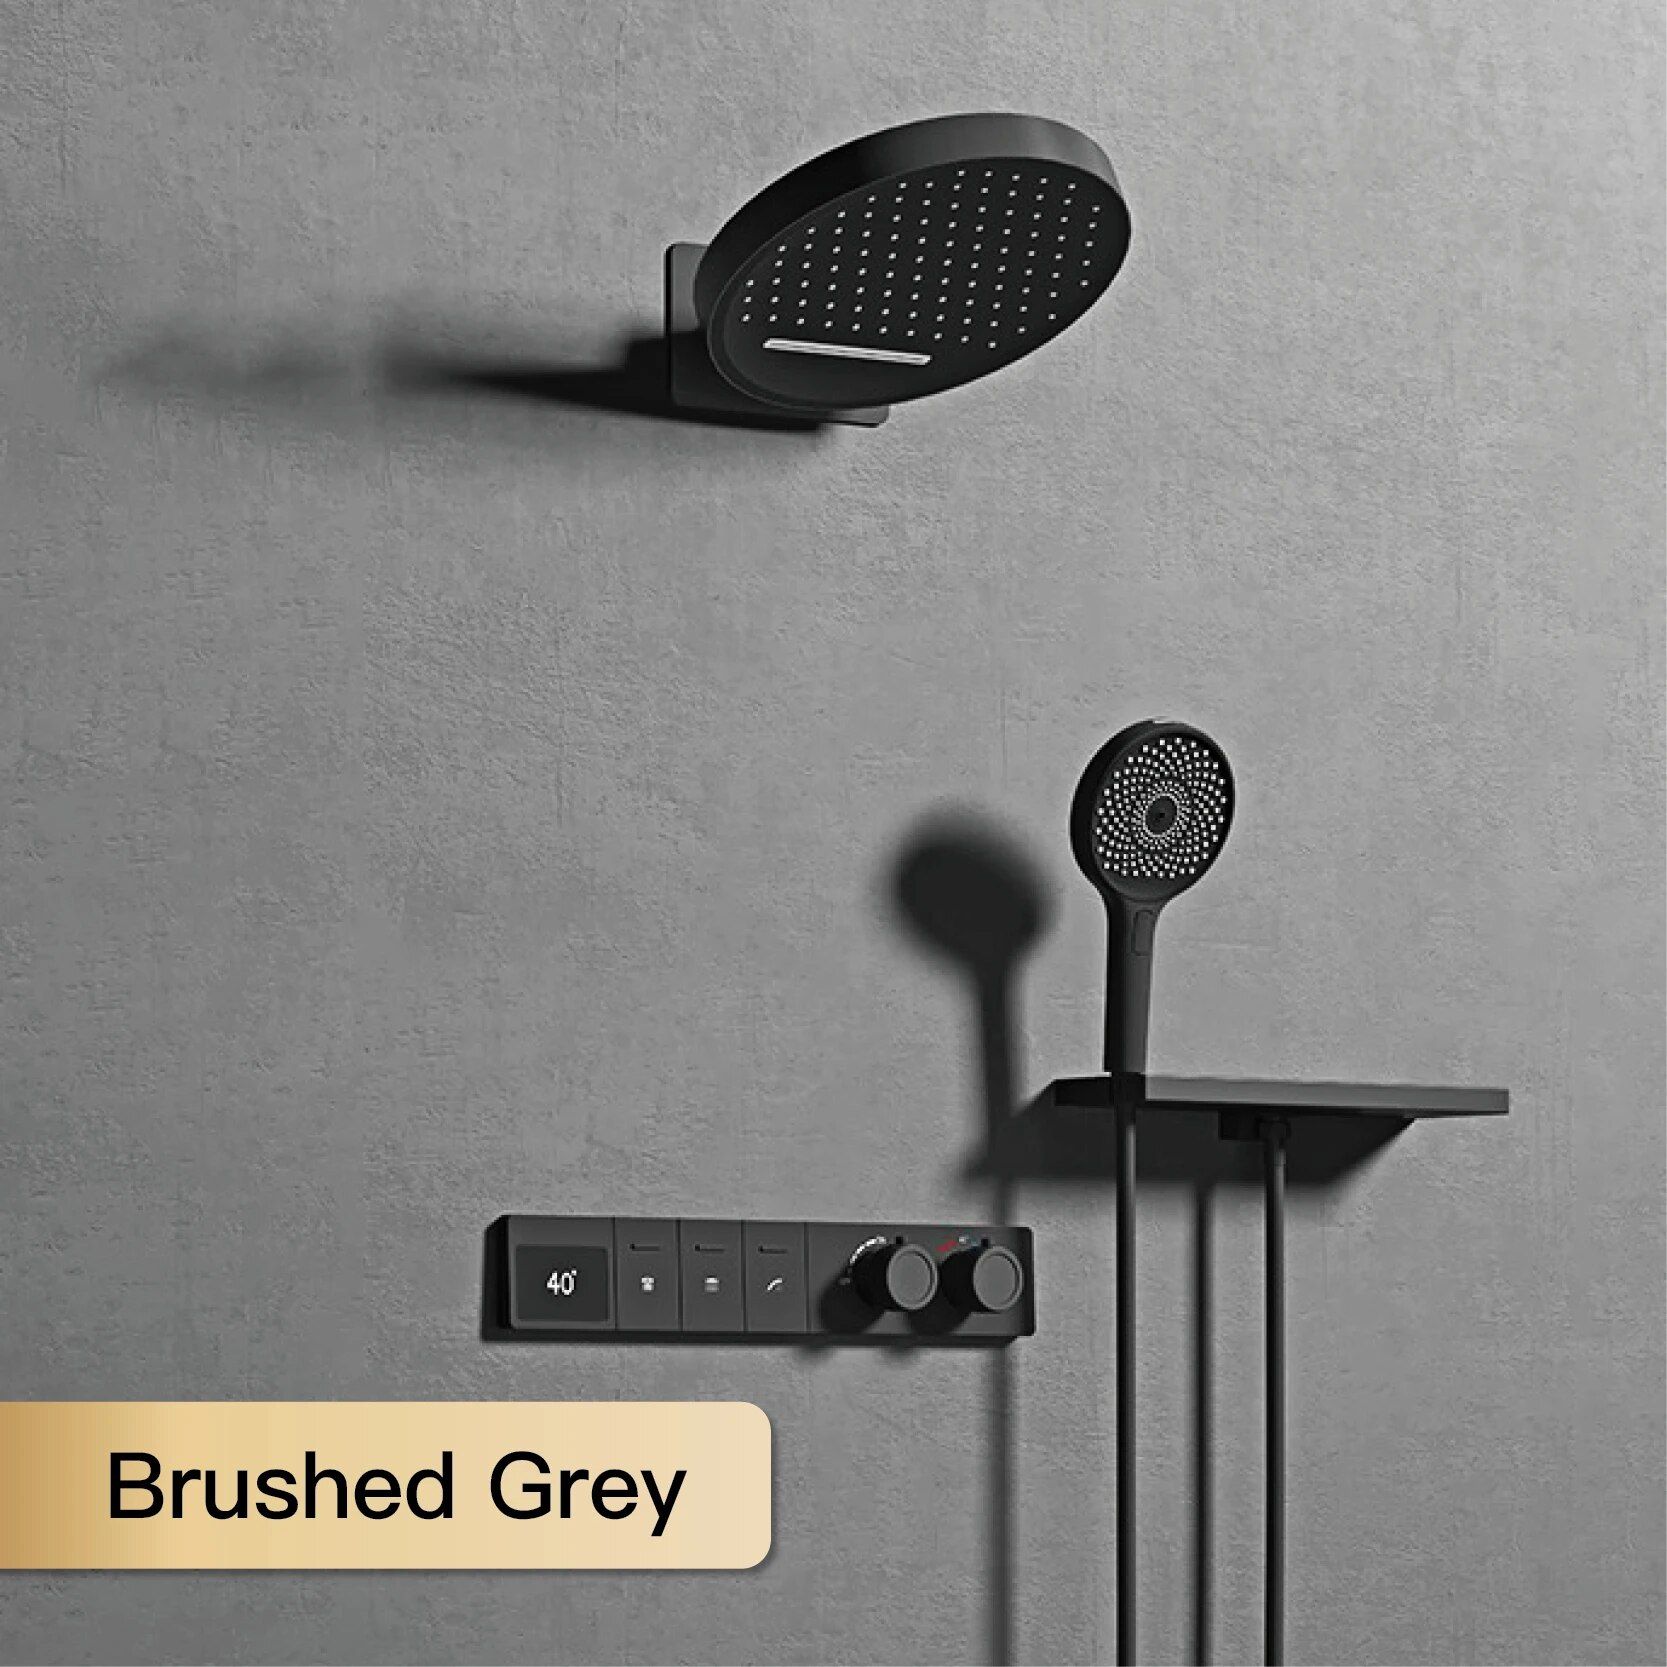 Brushed Grey (with a shelf)